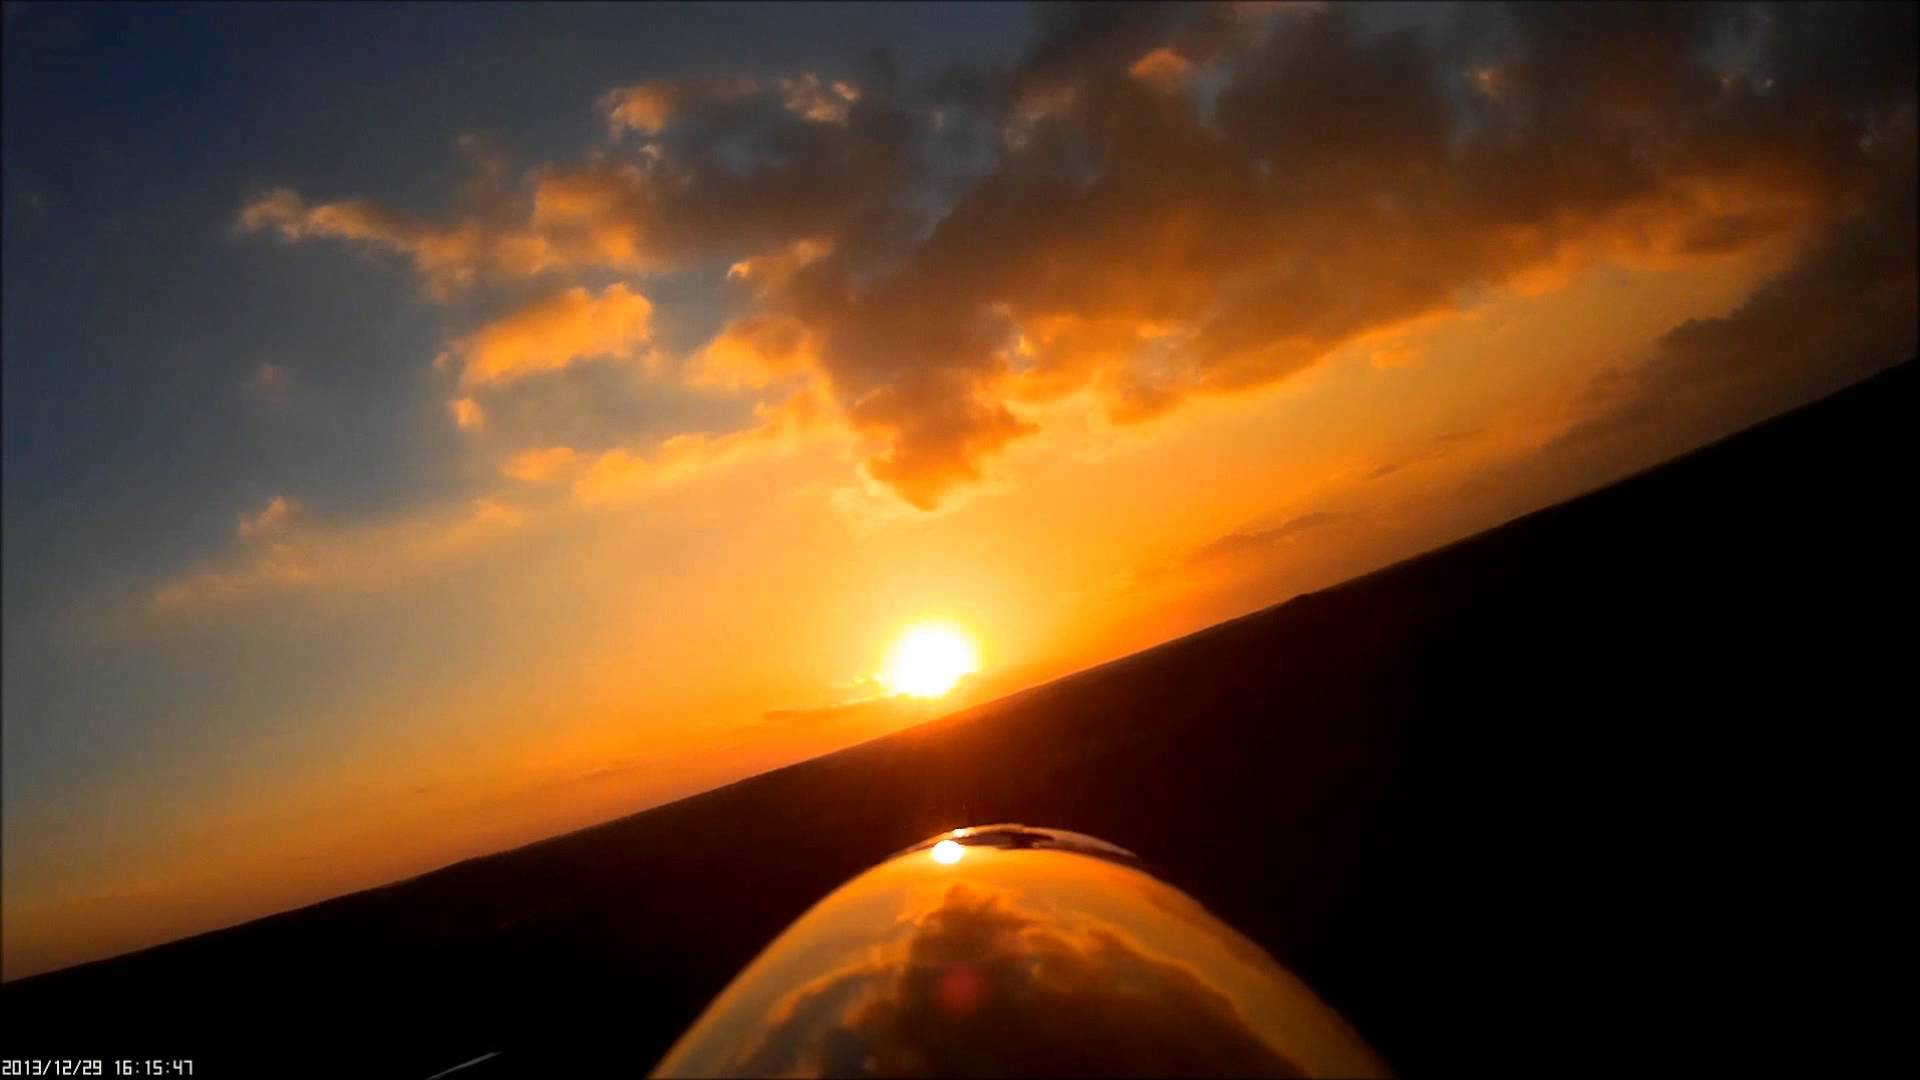 AXN Floater Jet (Clouds Fly) FPV-Winter Sunset - YouTube